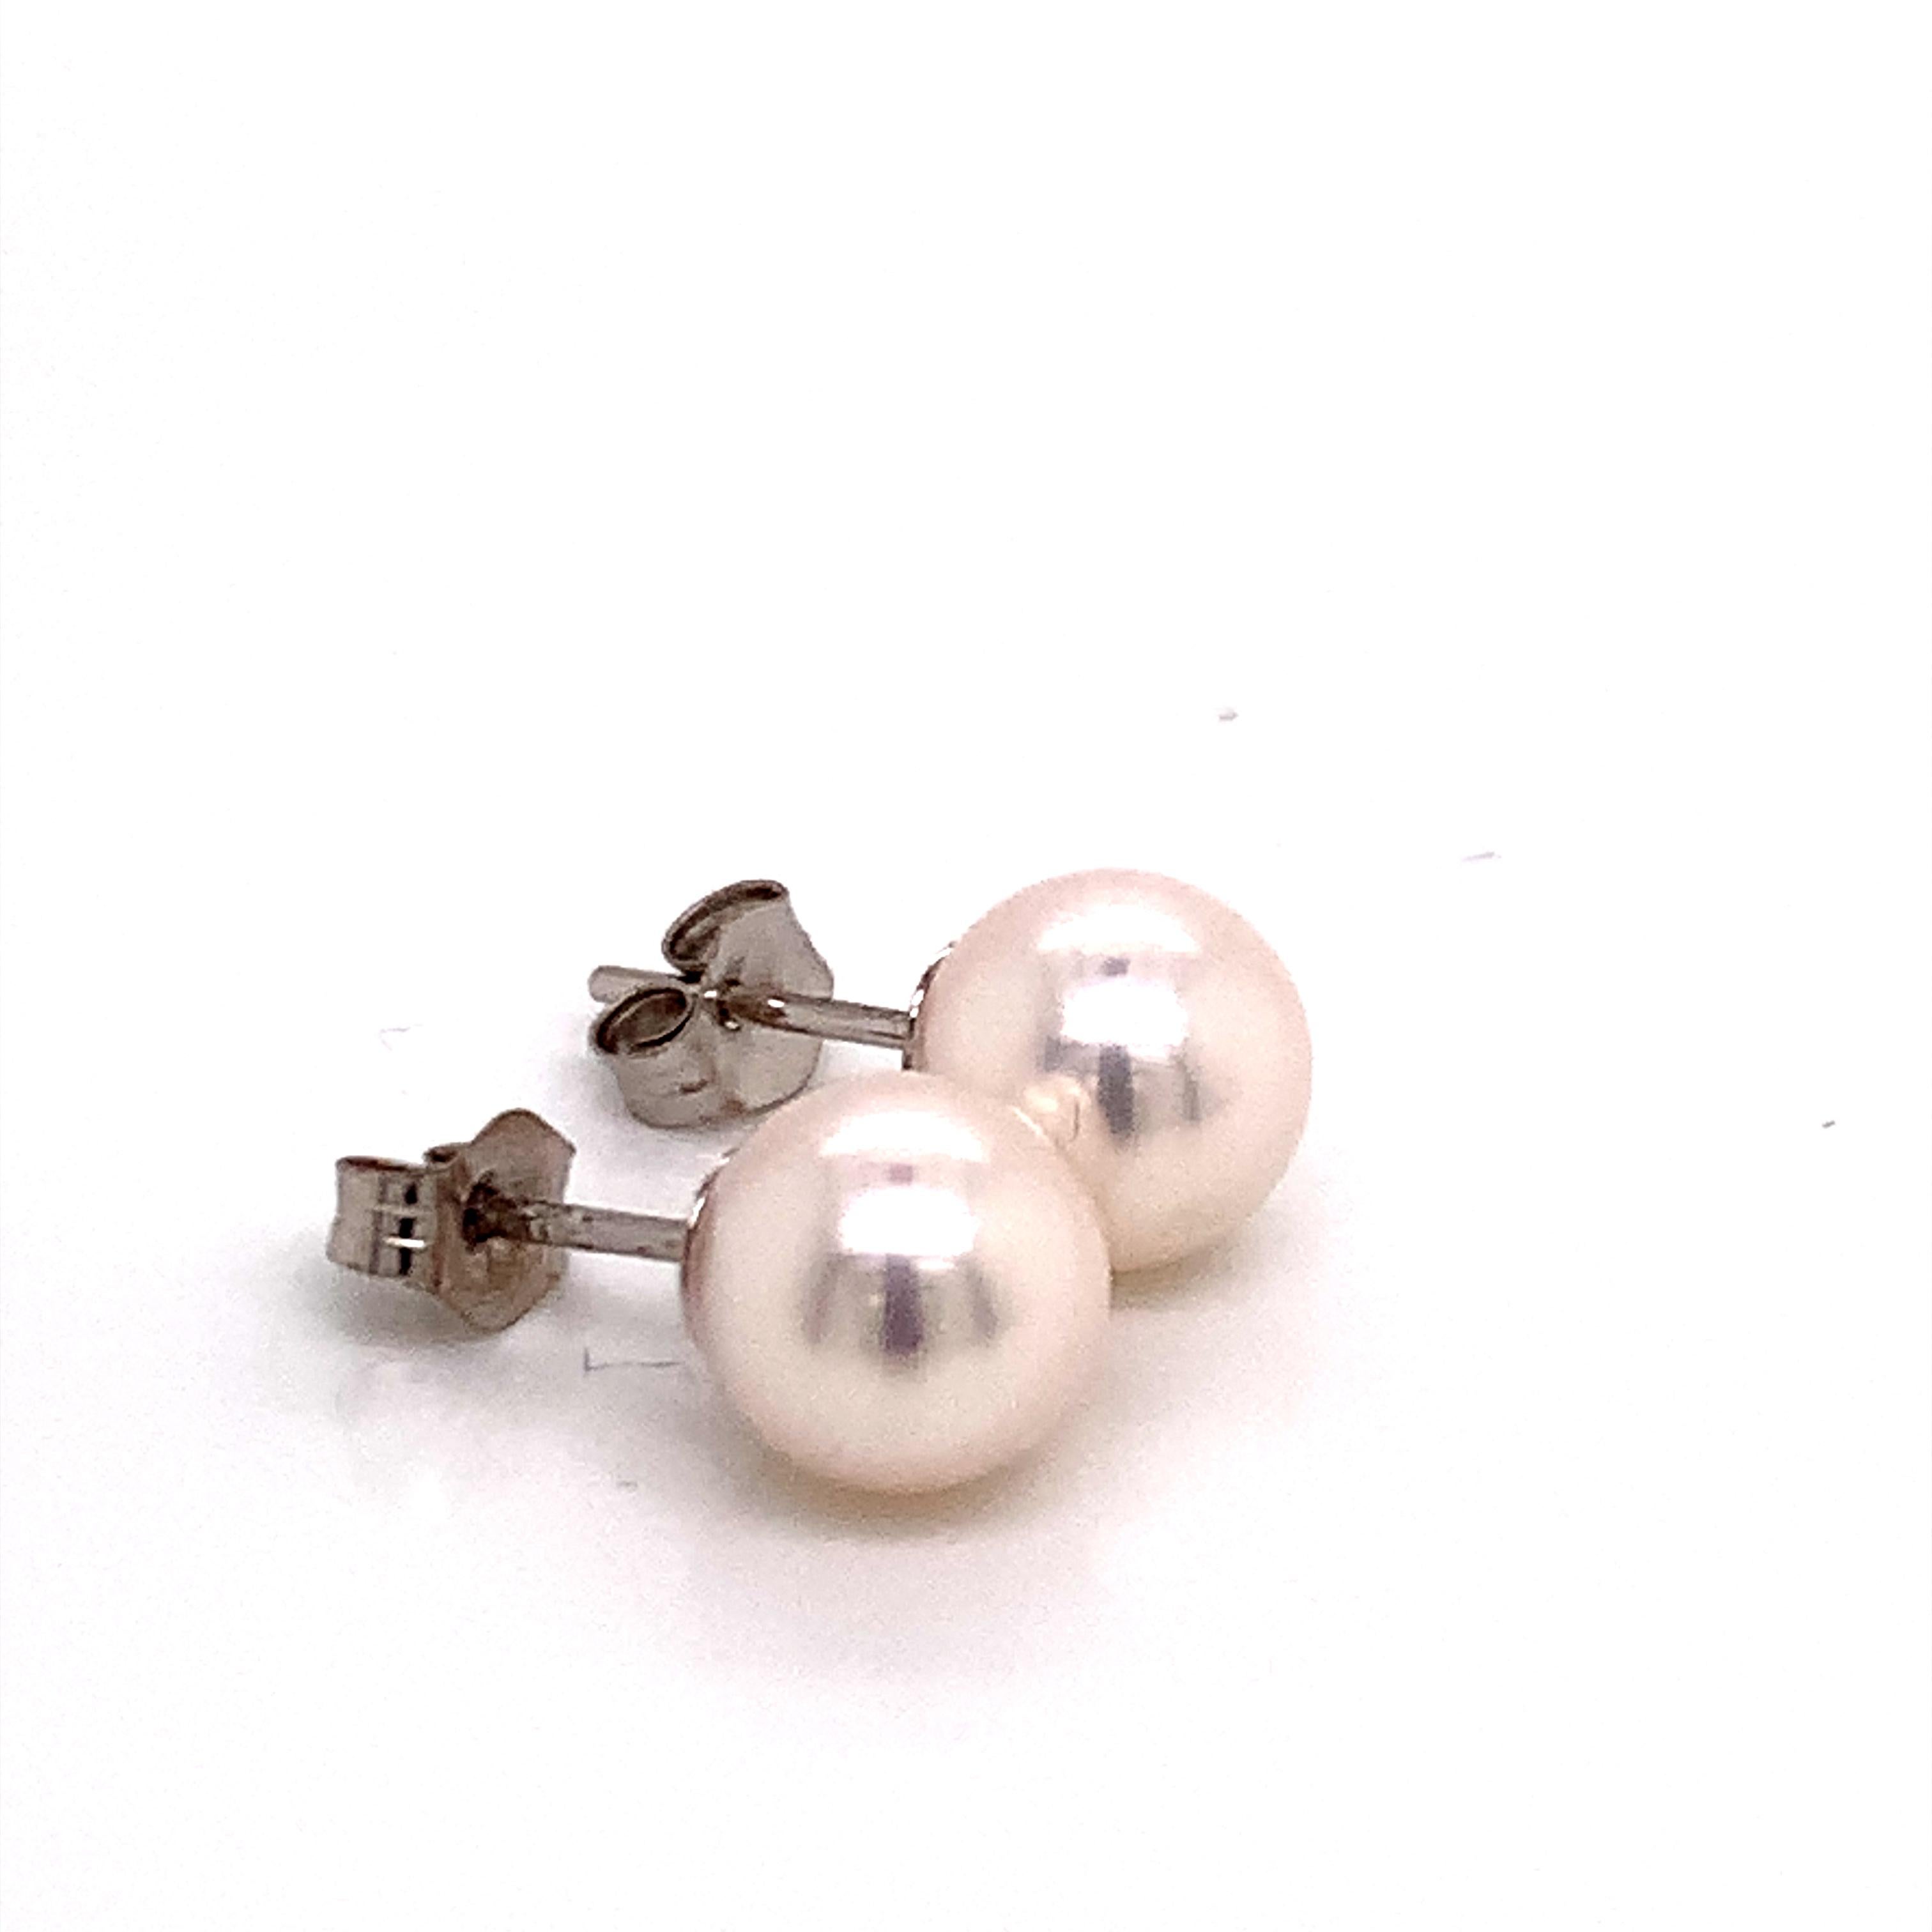 Fine Quality Akoya Pearl Earrings 14k White Gold 6.97 mm Certified $599 015868

This is a one of a Kind Unique Custom Made Glamorous Piece of Jewelry!
Nothing says, “I Love you” more than Diamonds and Pearls!
This item has been Certified, Inspected,